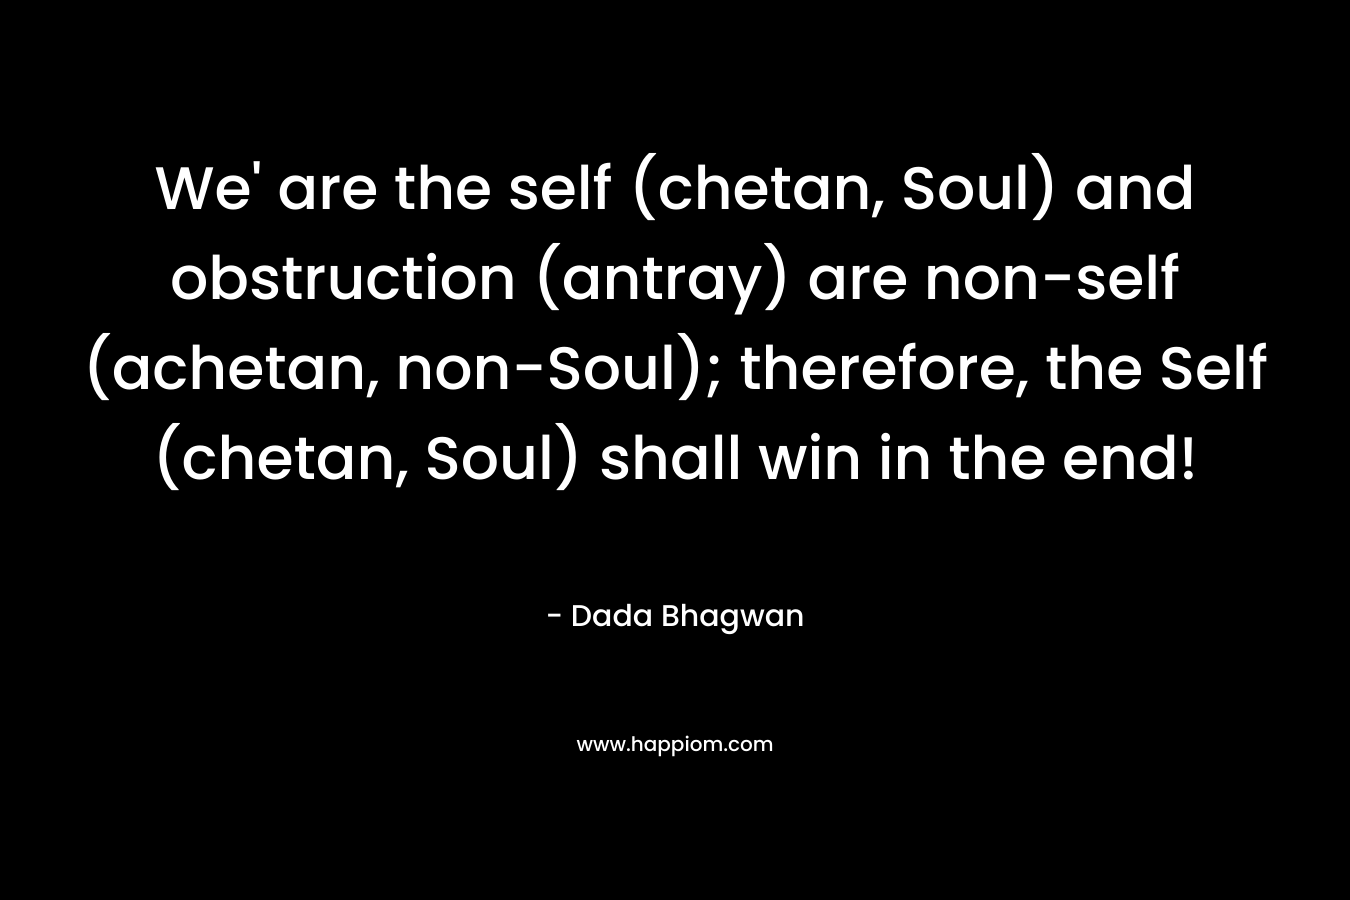 We’ are the self (chetan, Soul) and obstruction (antray) are non-self (achetan, non-Soul); therefore, the Self (chetan, Soul) shall win in the end! – Dada Bhagwan